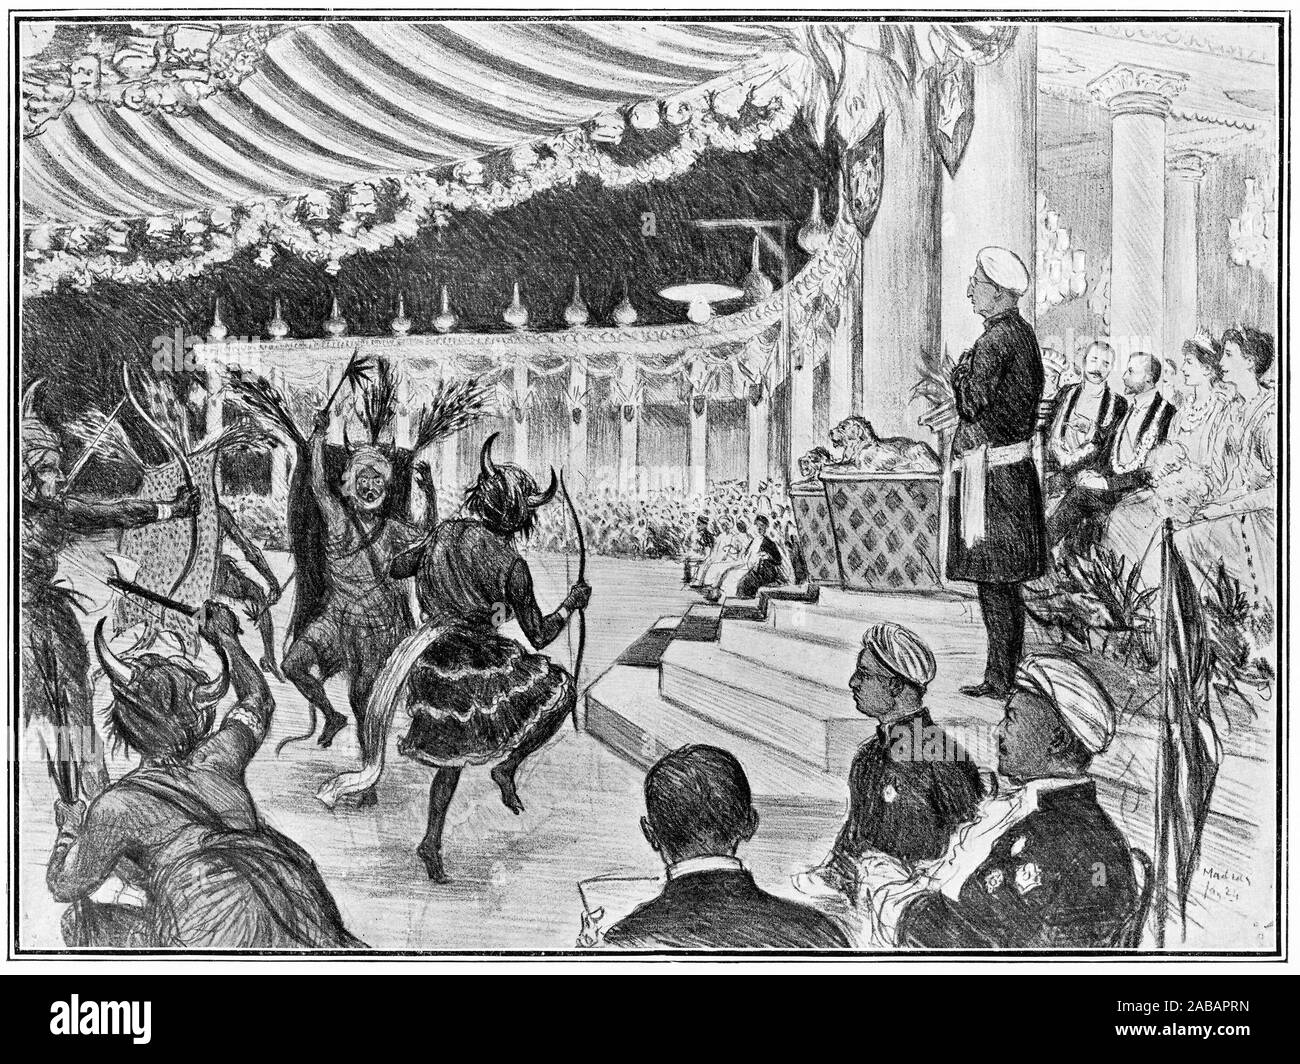 Halftone portrait of the dance of the Khonds tribe, performed for HRH the Prince of Wales during his state visit to India in 1906 Stock Photo